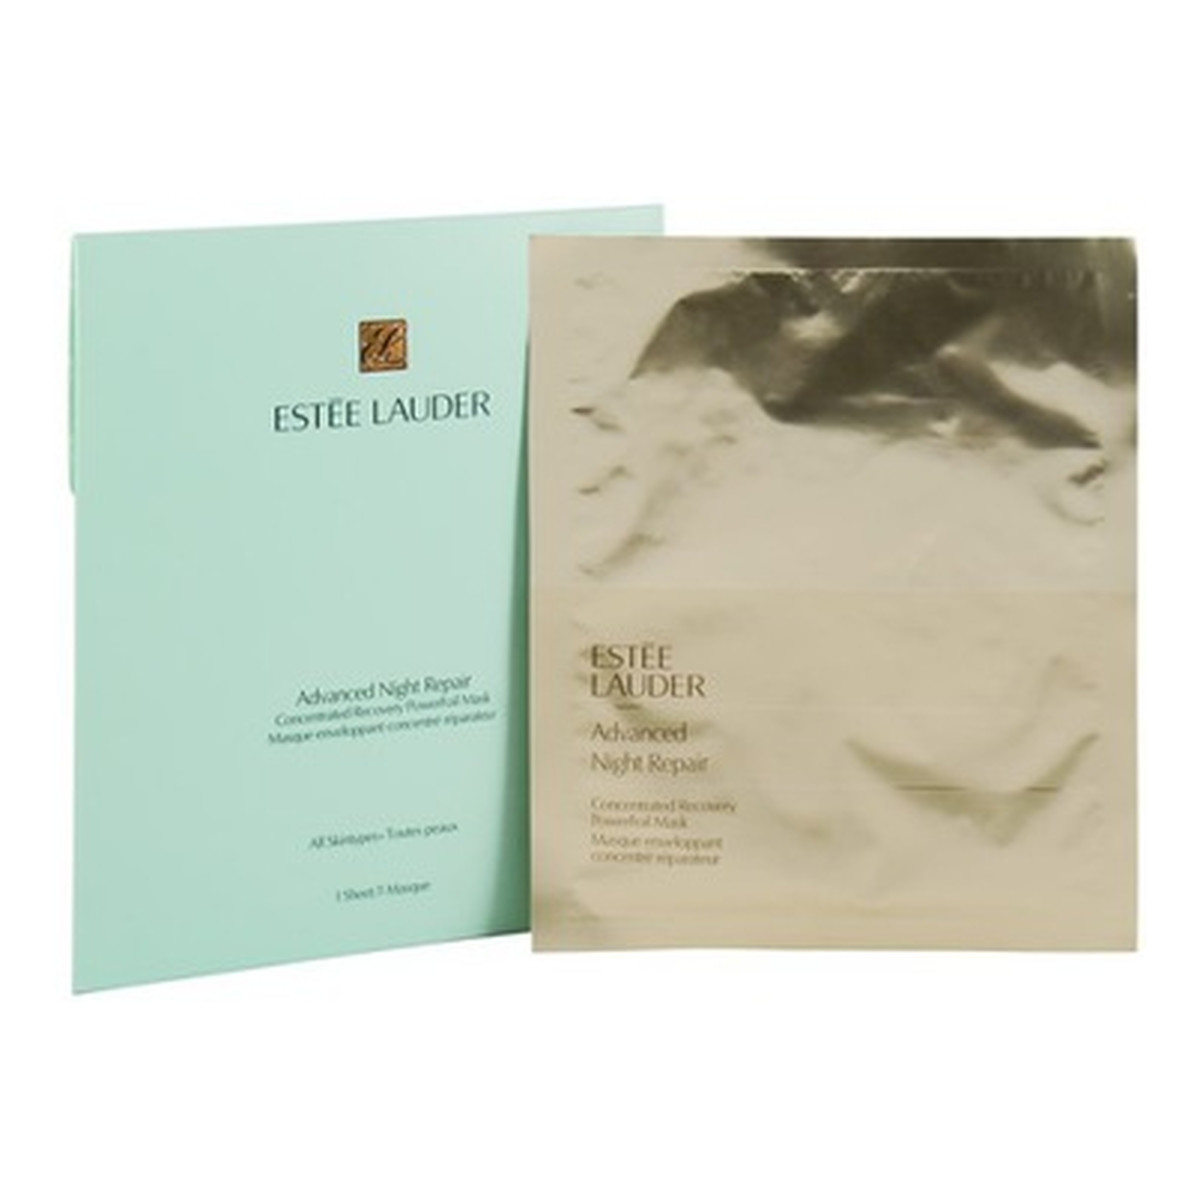 Estee Lauder Advanced Night Repair Concentrated Recovery PowerFoil Mask maseczka do twarzy 25ml